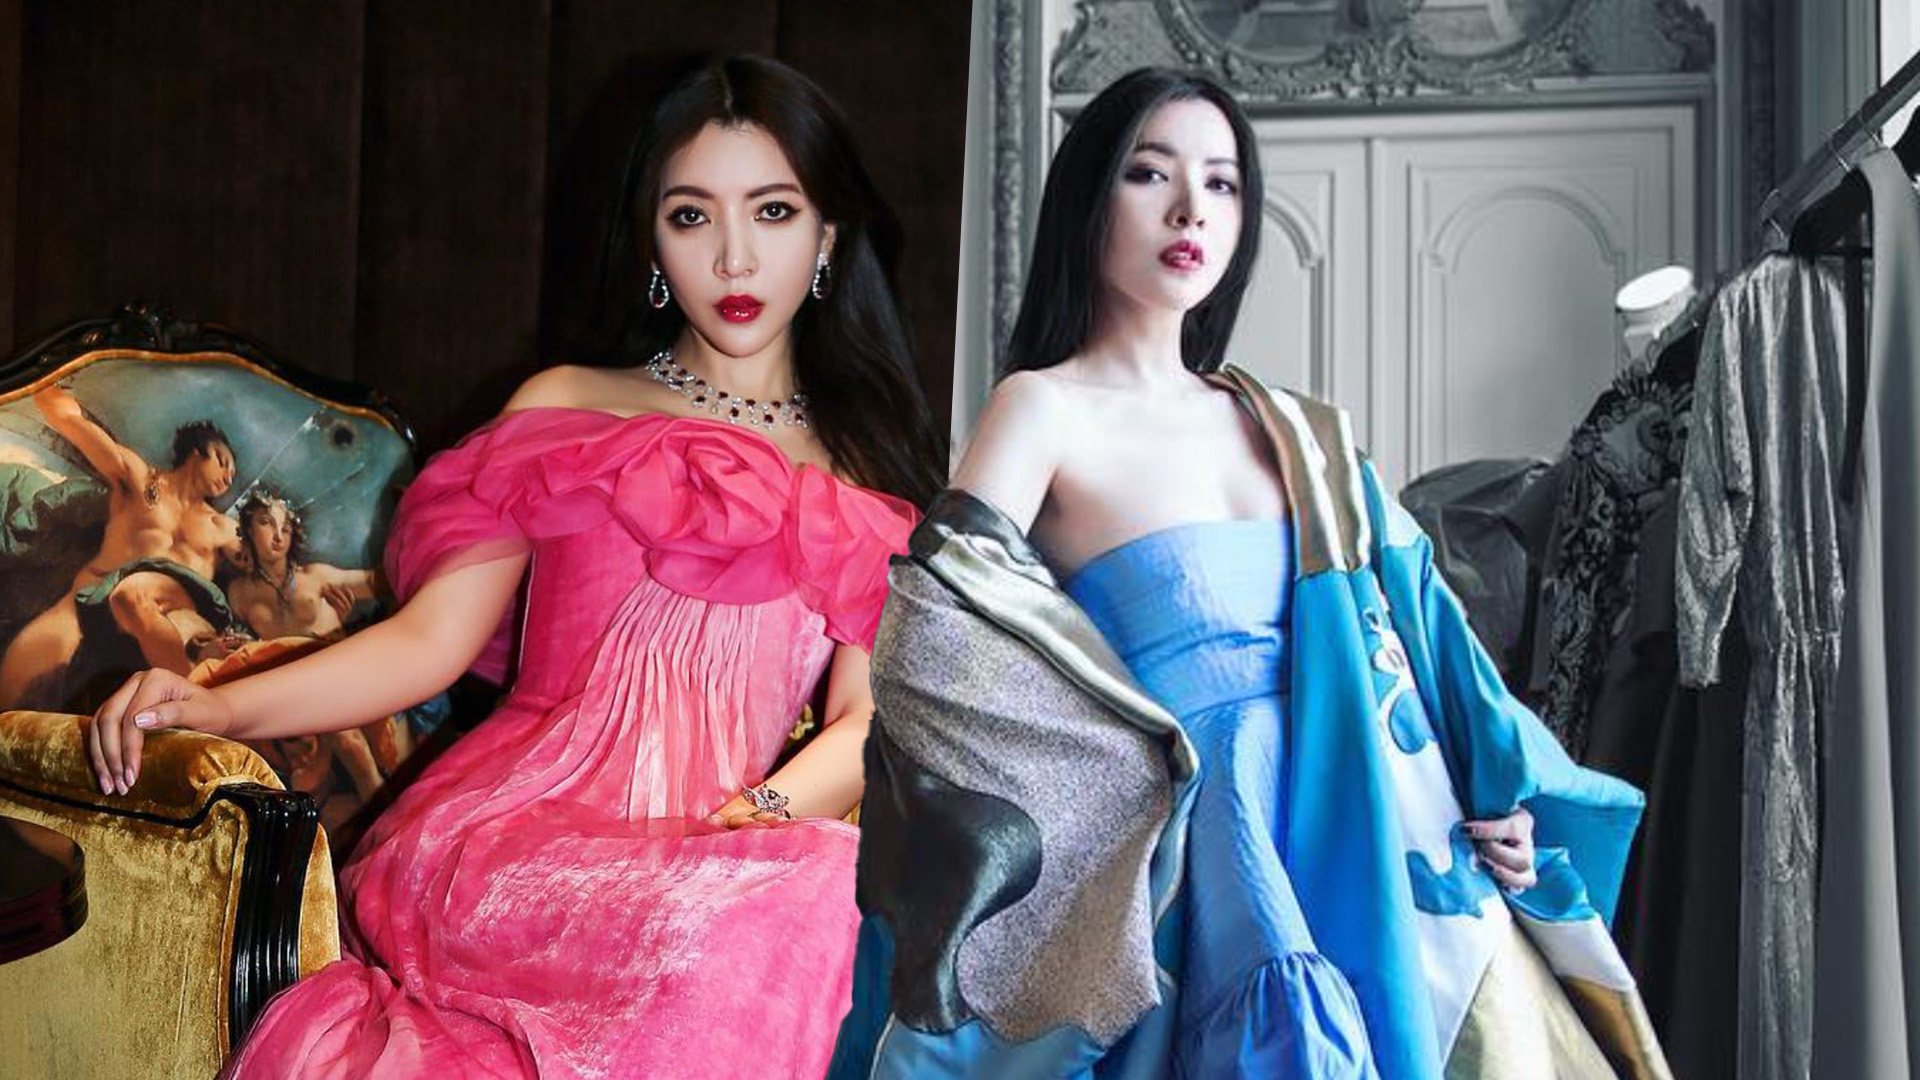 A KOL in China known as the “haute couture queen” has expressed anger after a French fashion house loaned a dress she had paid a deposit for to a British actress. Photo: SCMP composite/Instagram@iammadamlulu
